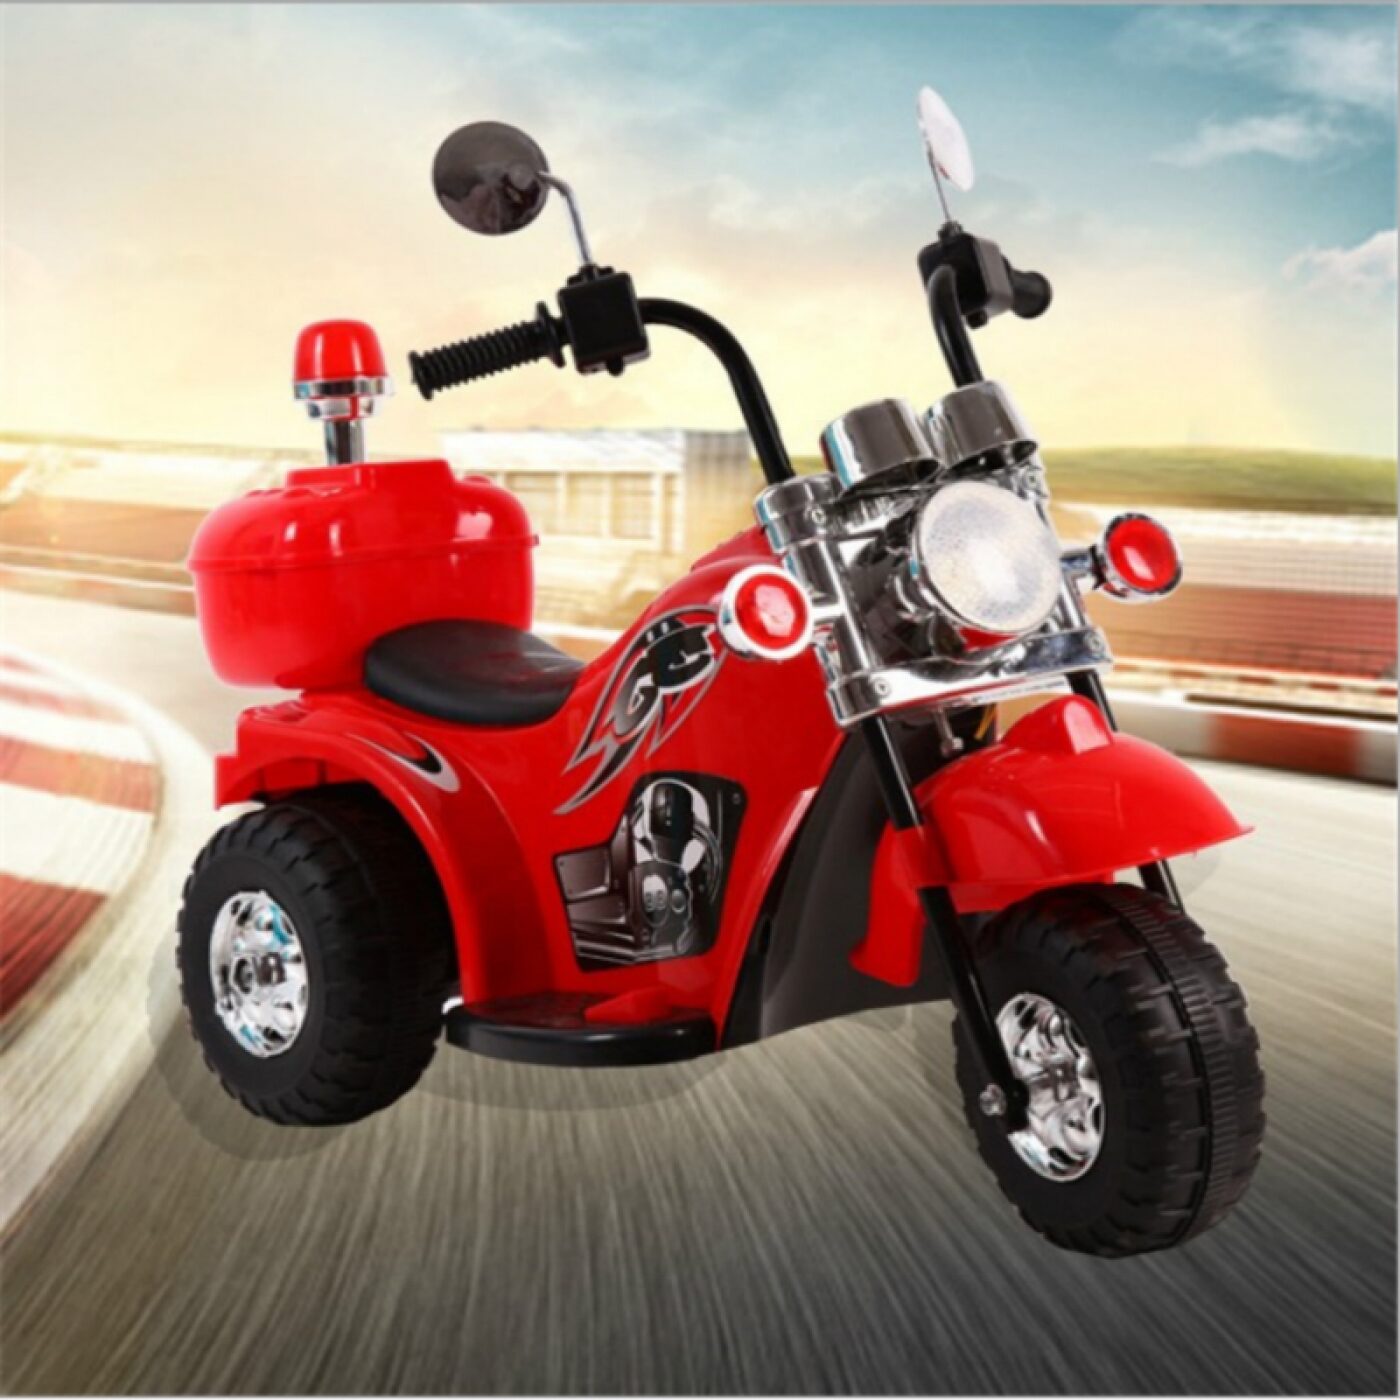 Hot selling plastic kids mini motorcycle toy / electric